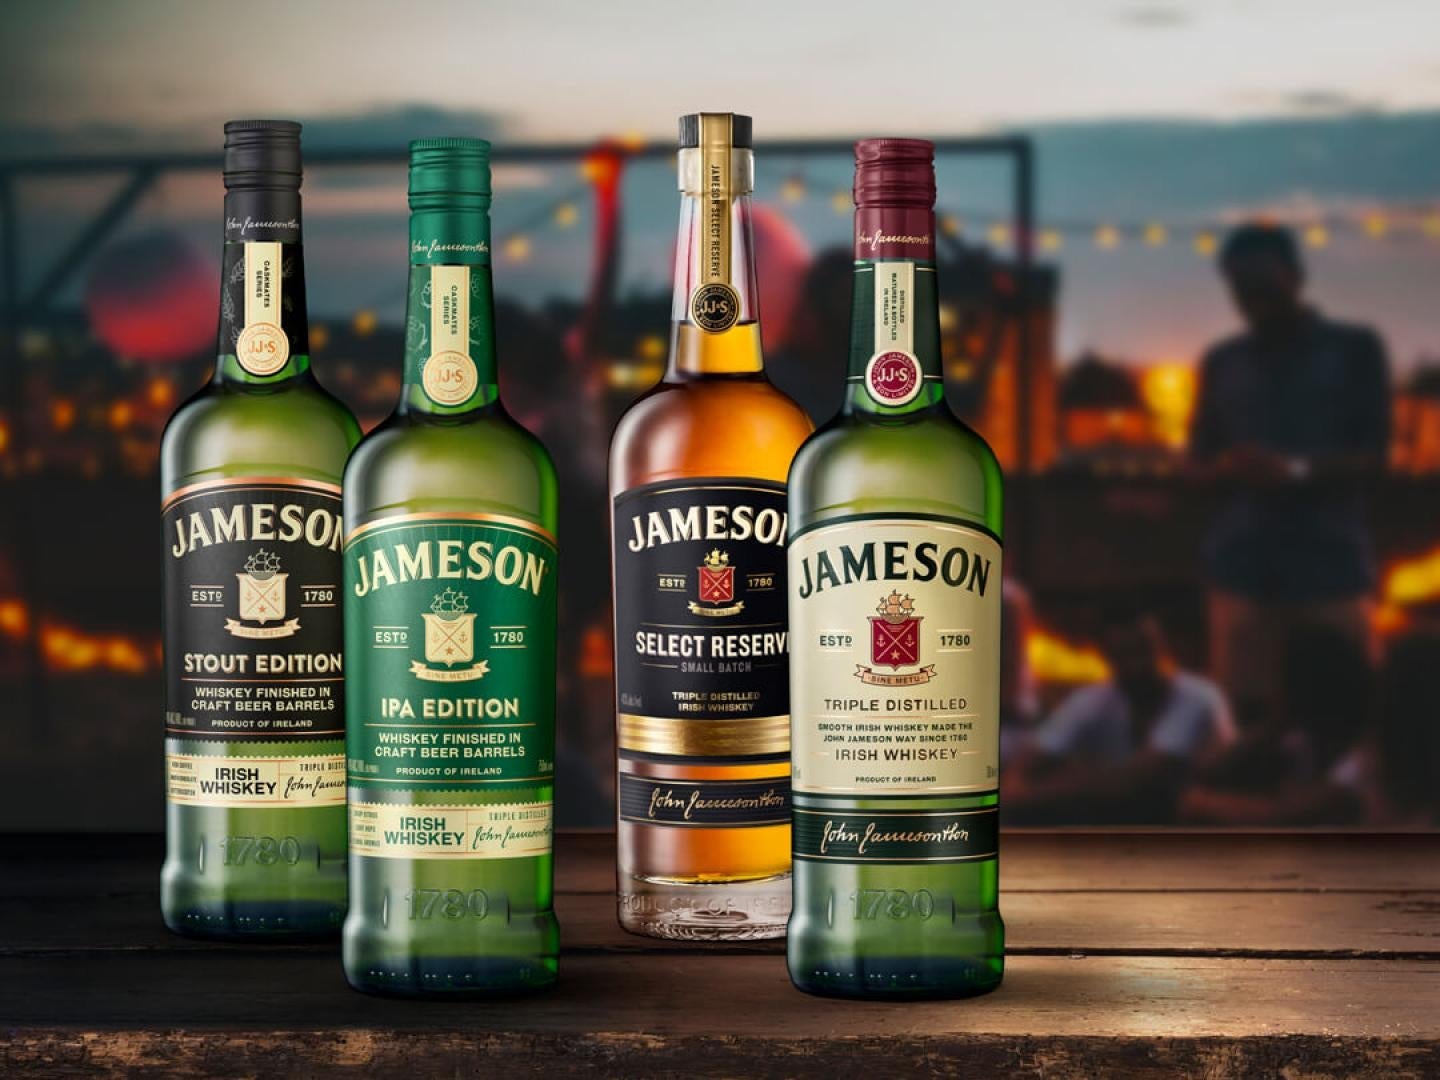 Jameson whiskey owner Pernod Ricard has seen profits and sales rise (Pernod Ricard/PA)